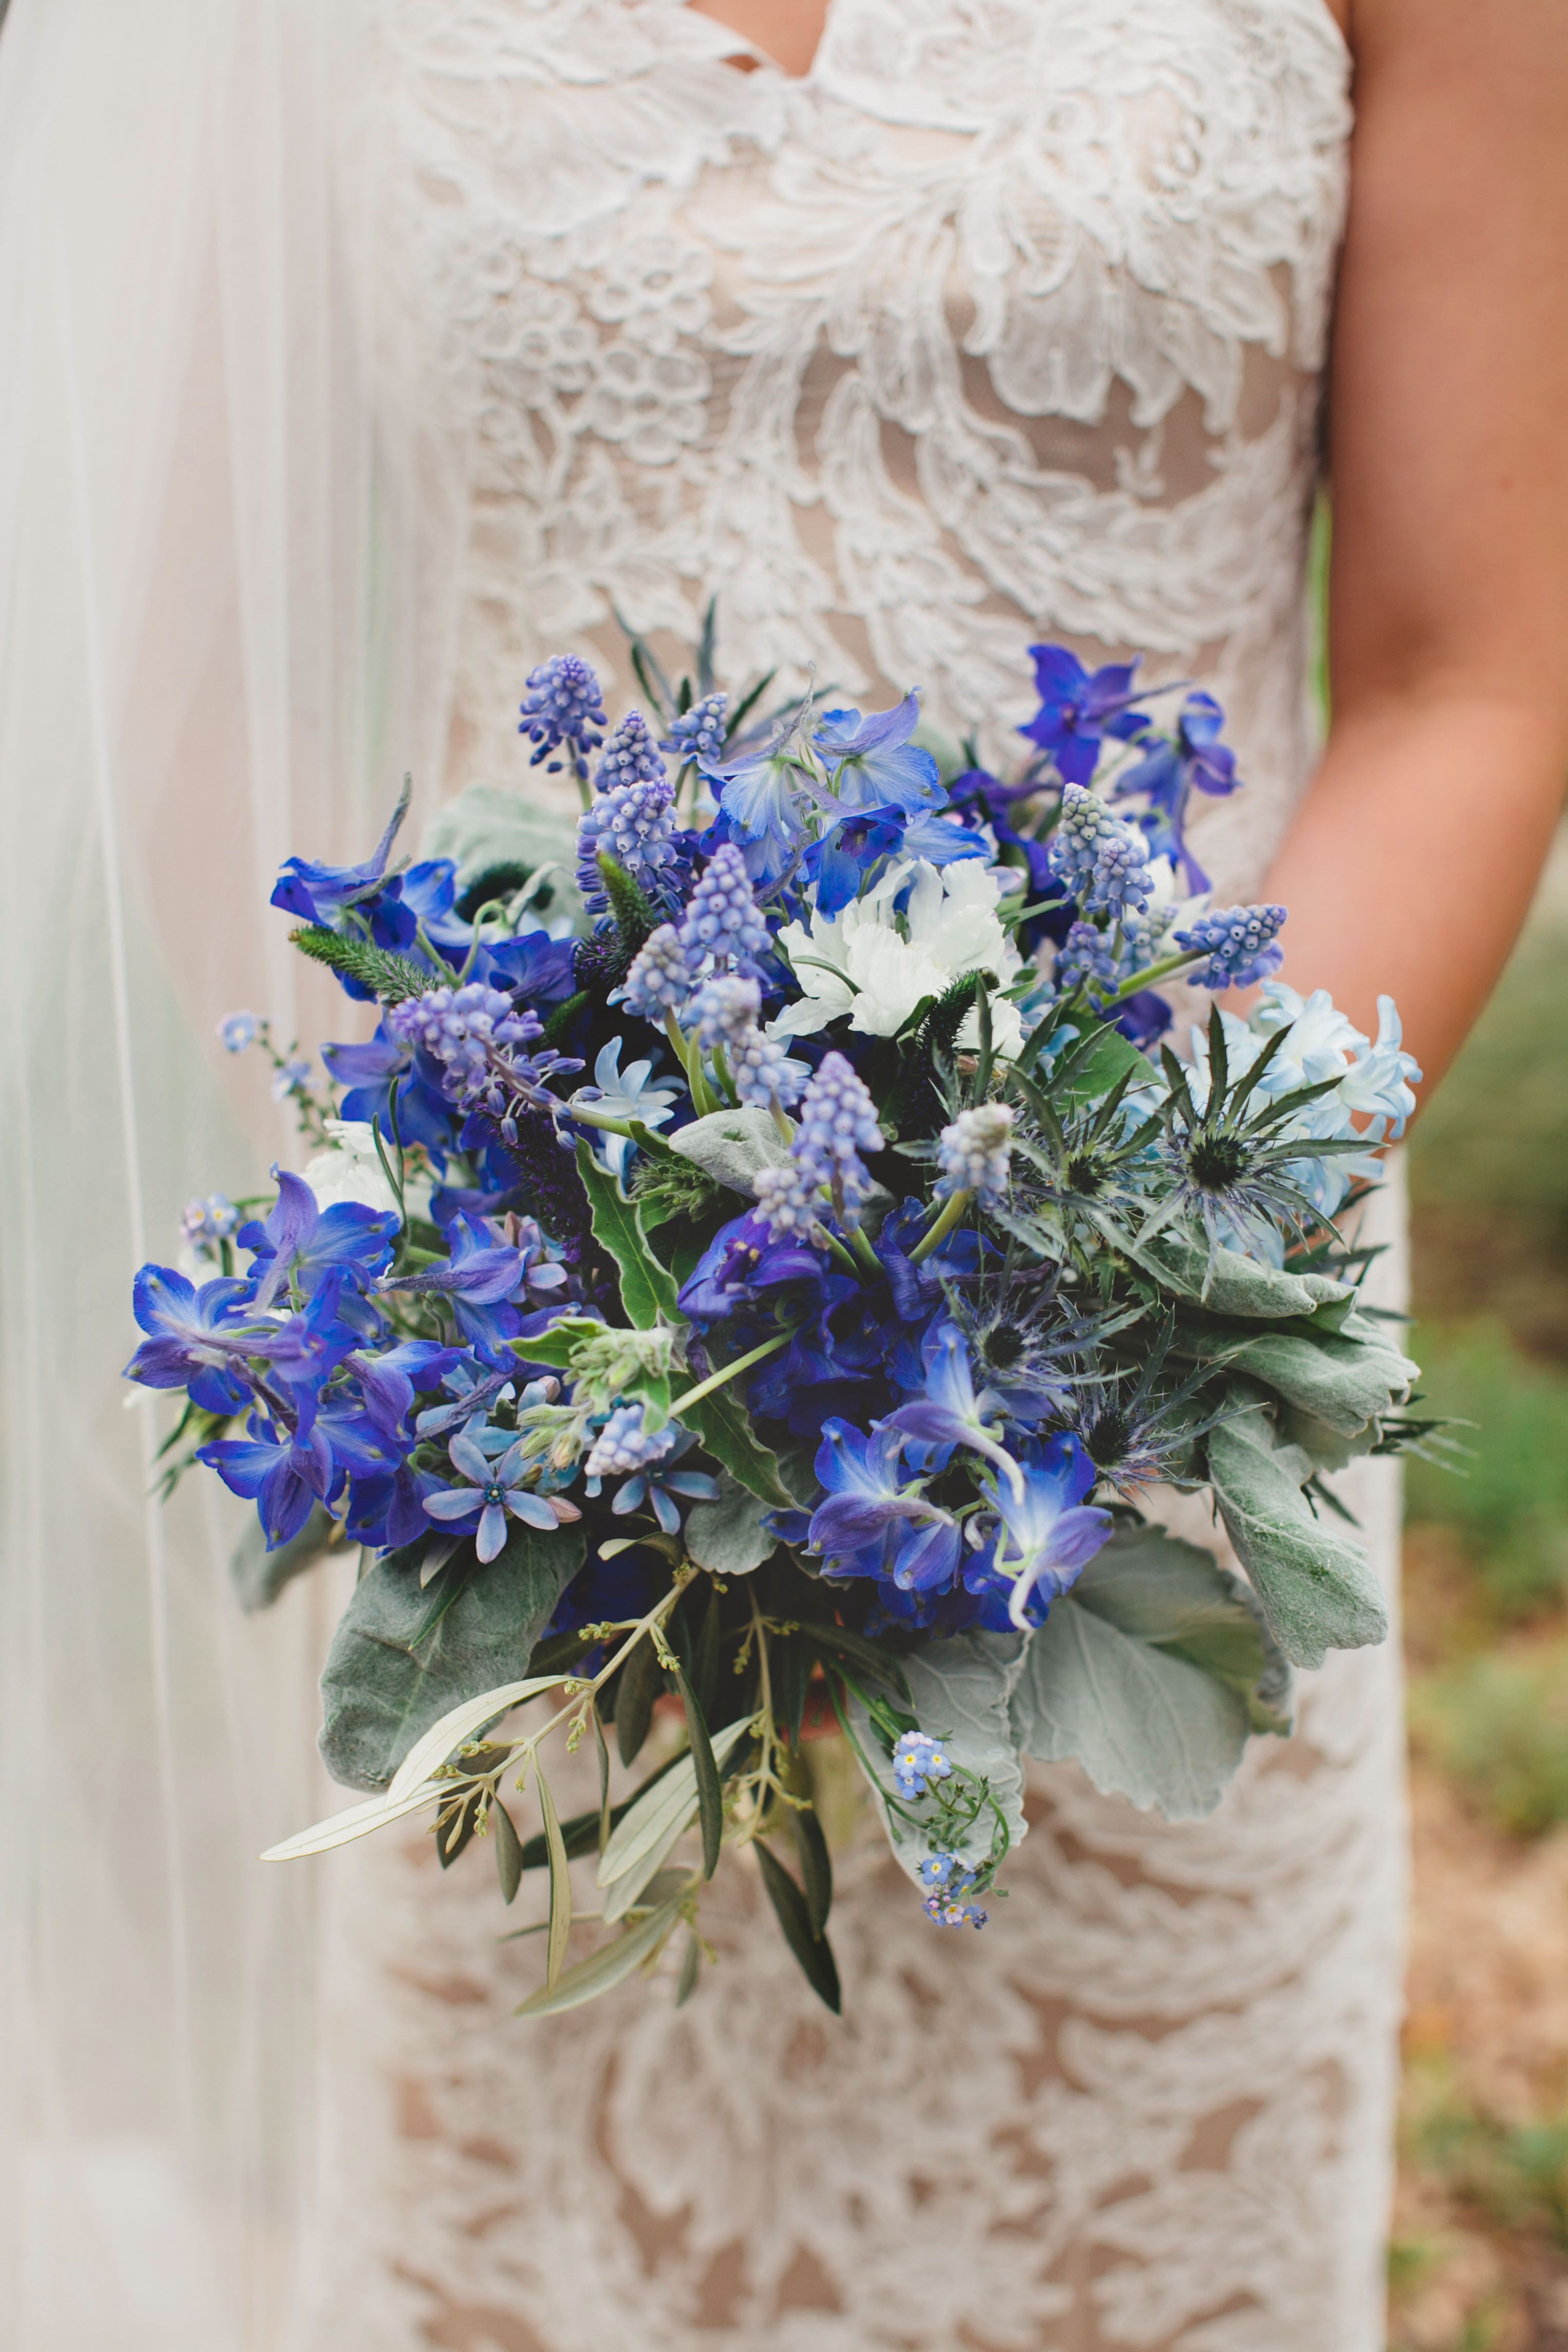 22 Beautiful Bouquets That Can Double as Your Something Blue - 22 Beautiful Bouquets That Can Double as Your Something Blue -   19 beauty Flowers bouquet ideas